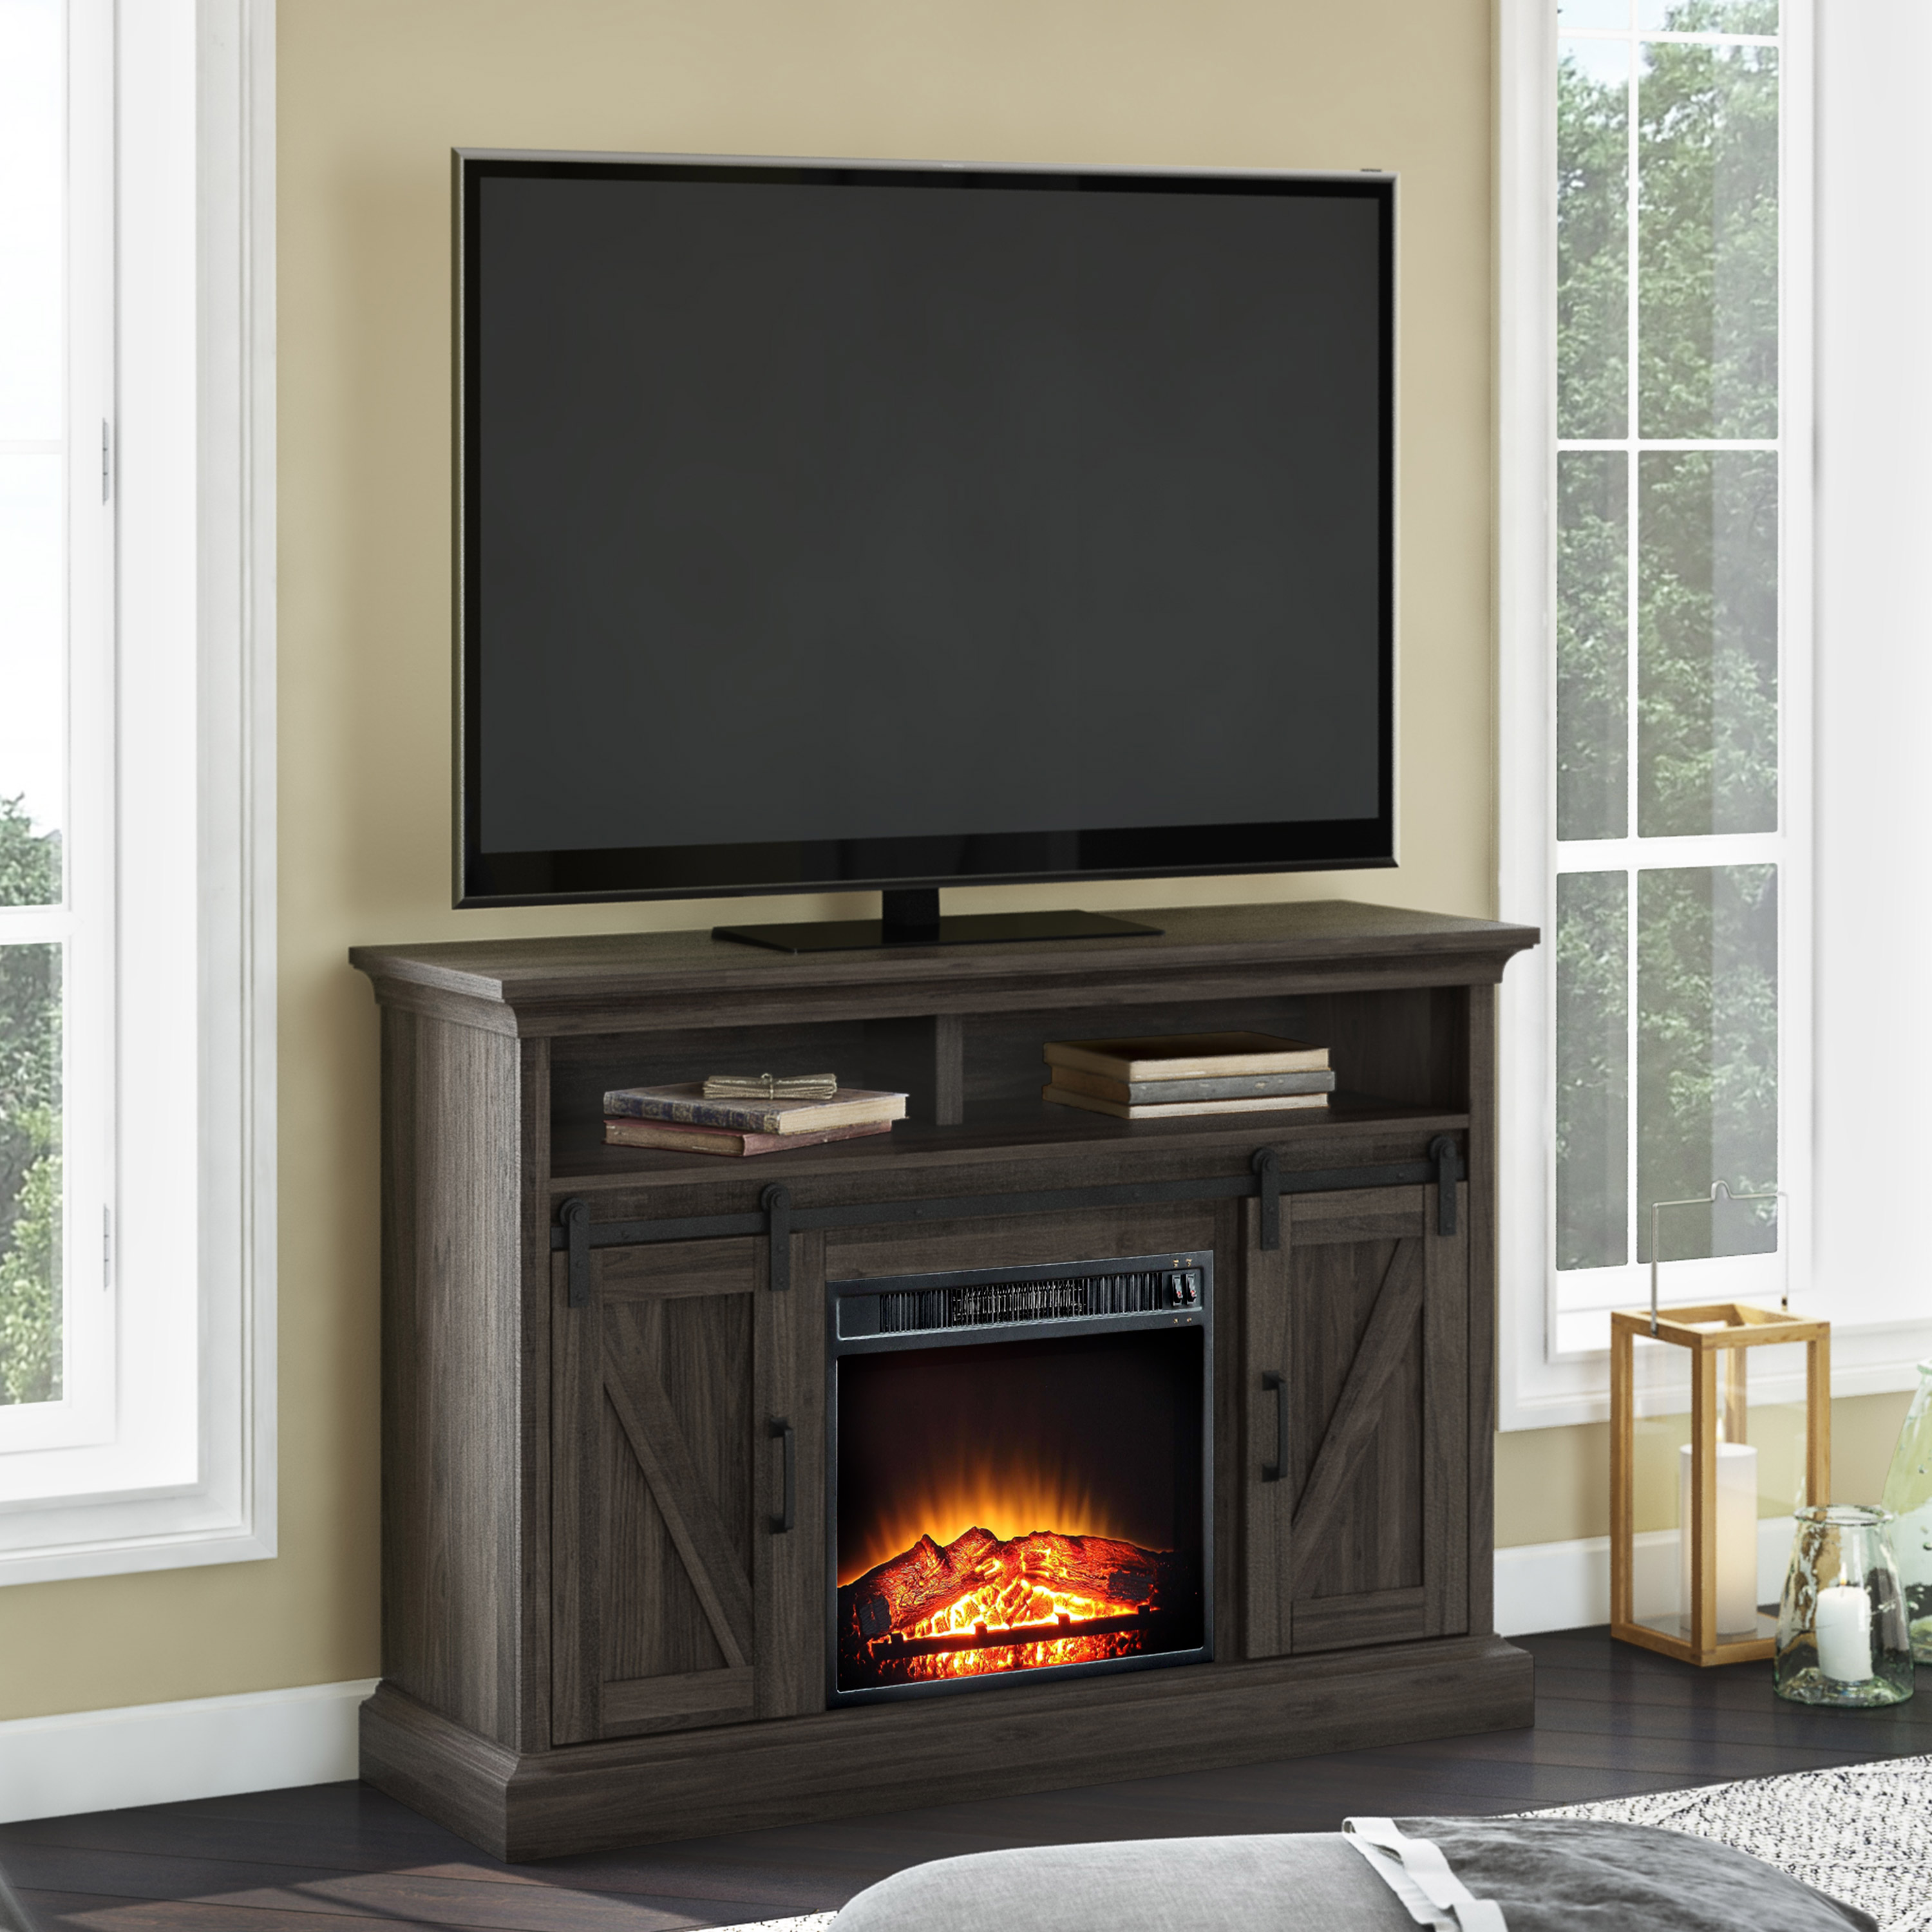 Whalen Allston Barn Door Fireplace TV Stand for TVs Up to 58" - image 1 of 8